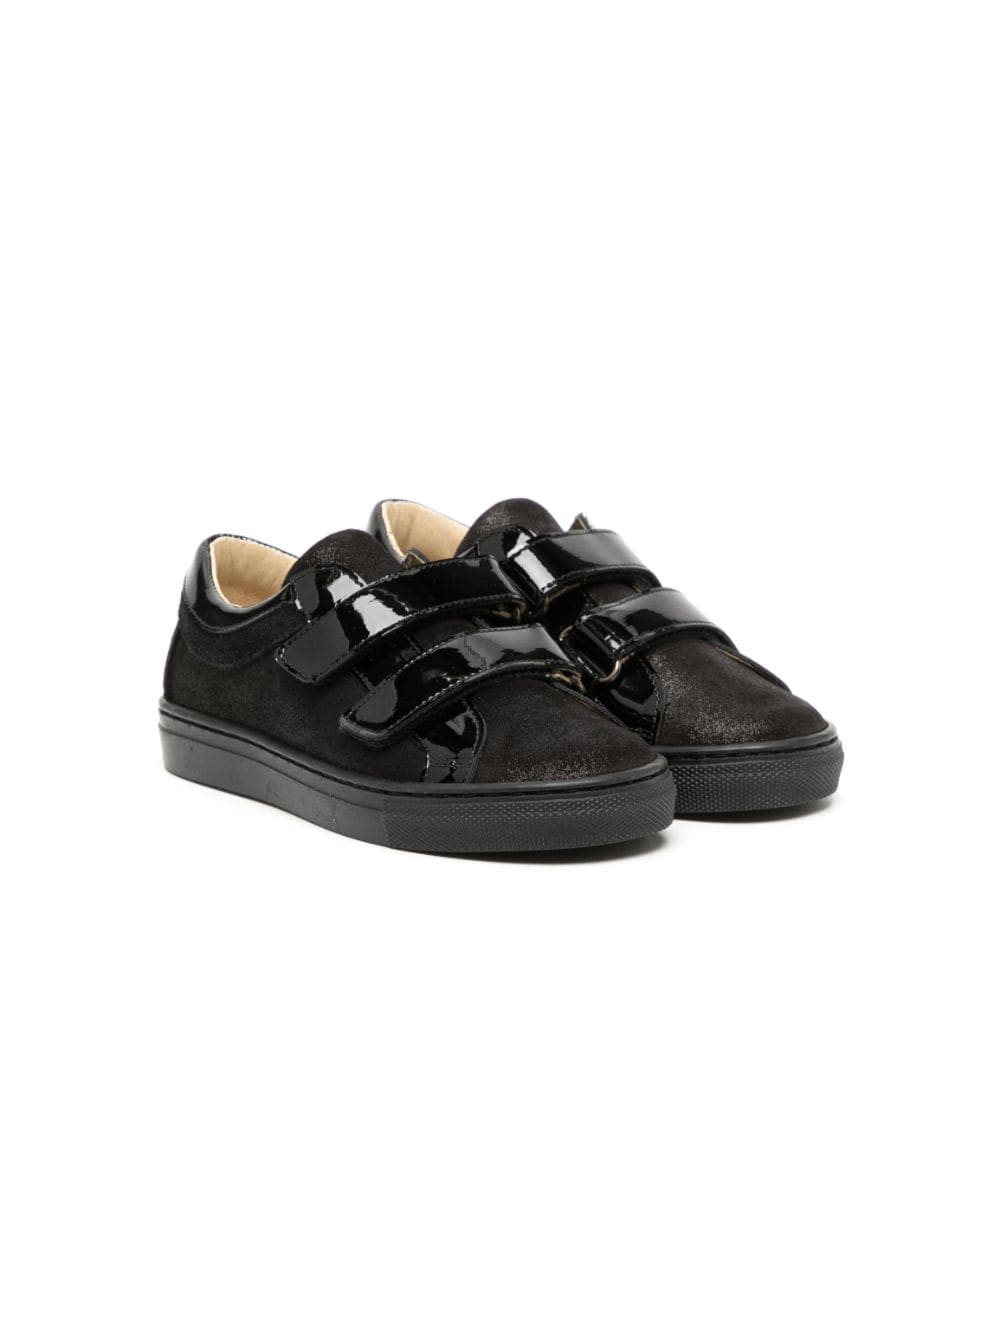 ANDANINES touch-strap patent leather sneakers - Black von ANDANINES